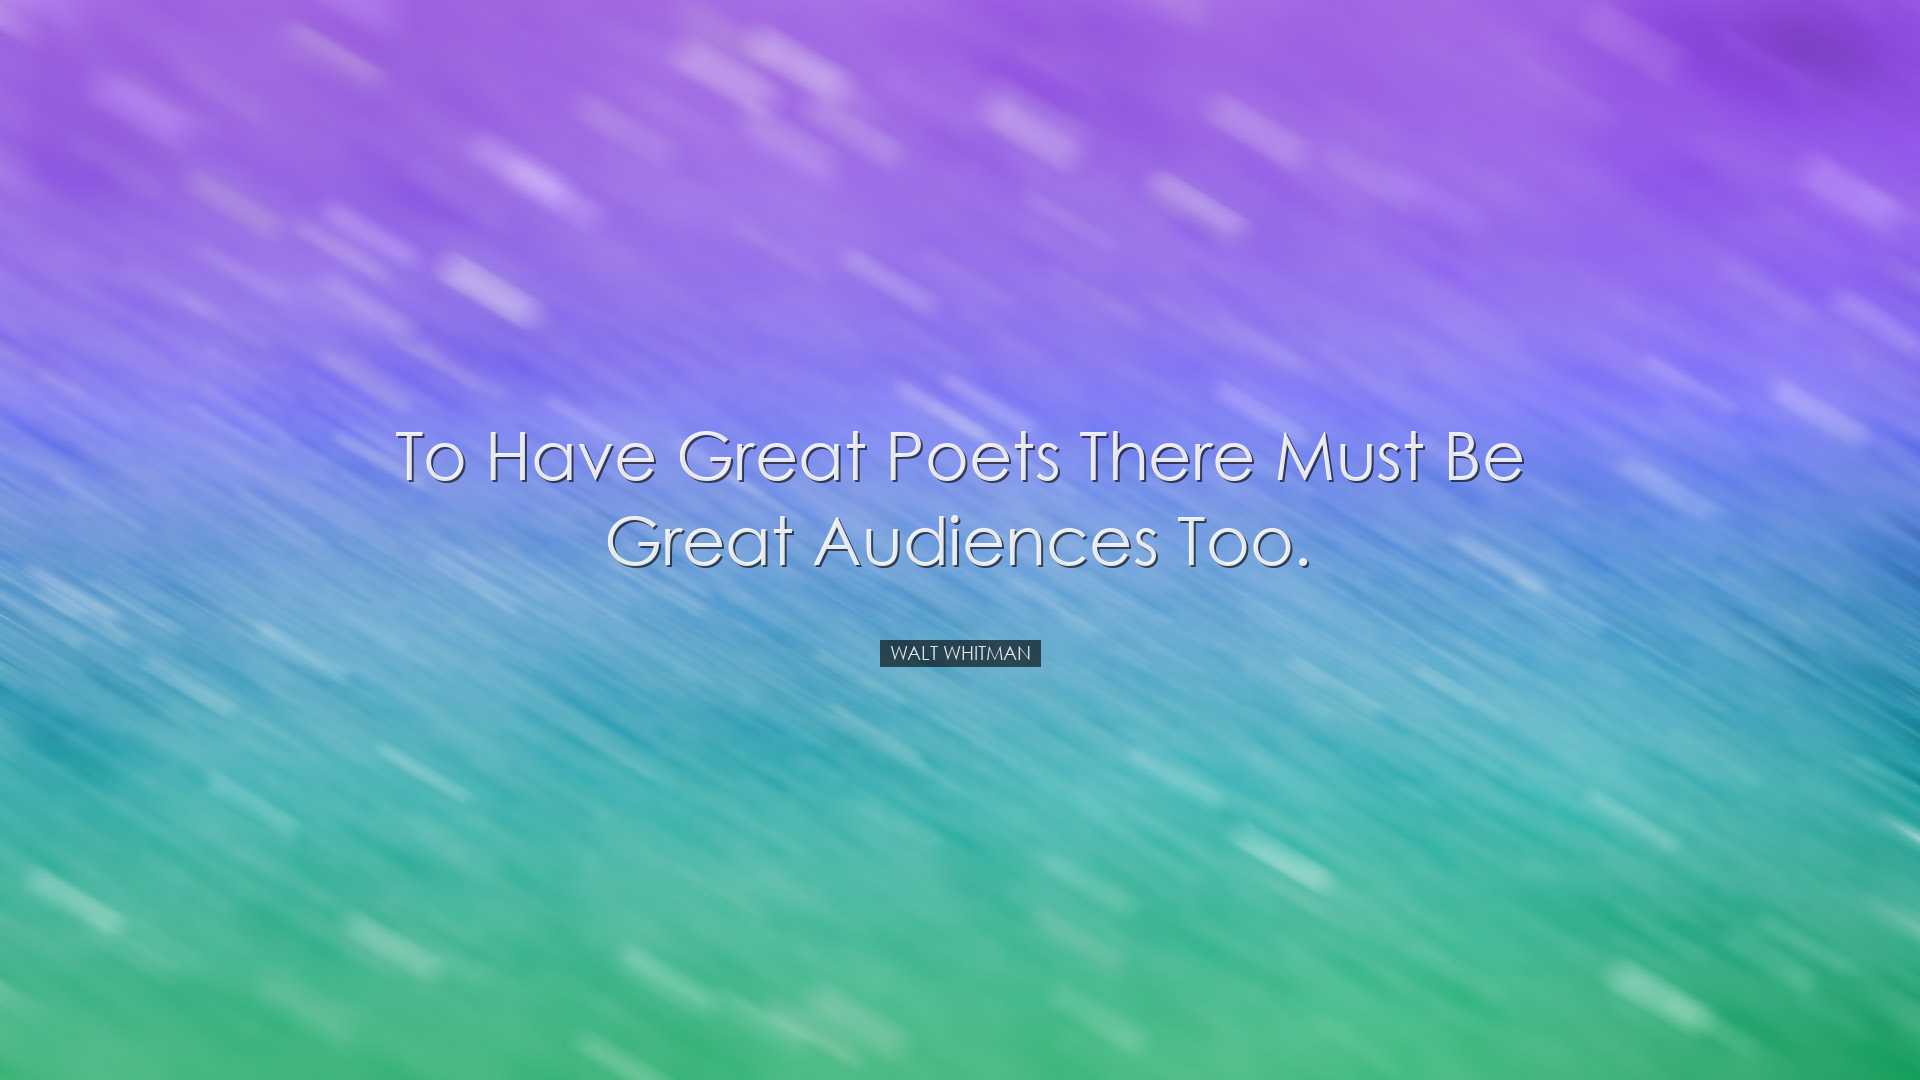 To have great poets there must be great audiences too. - Walt Whit